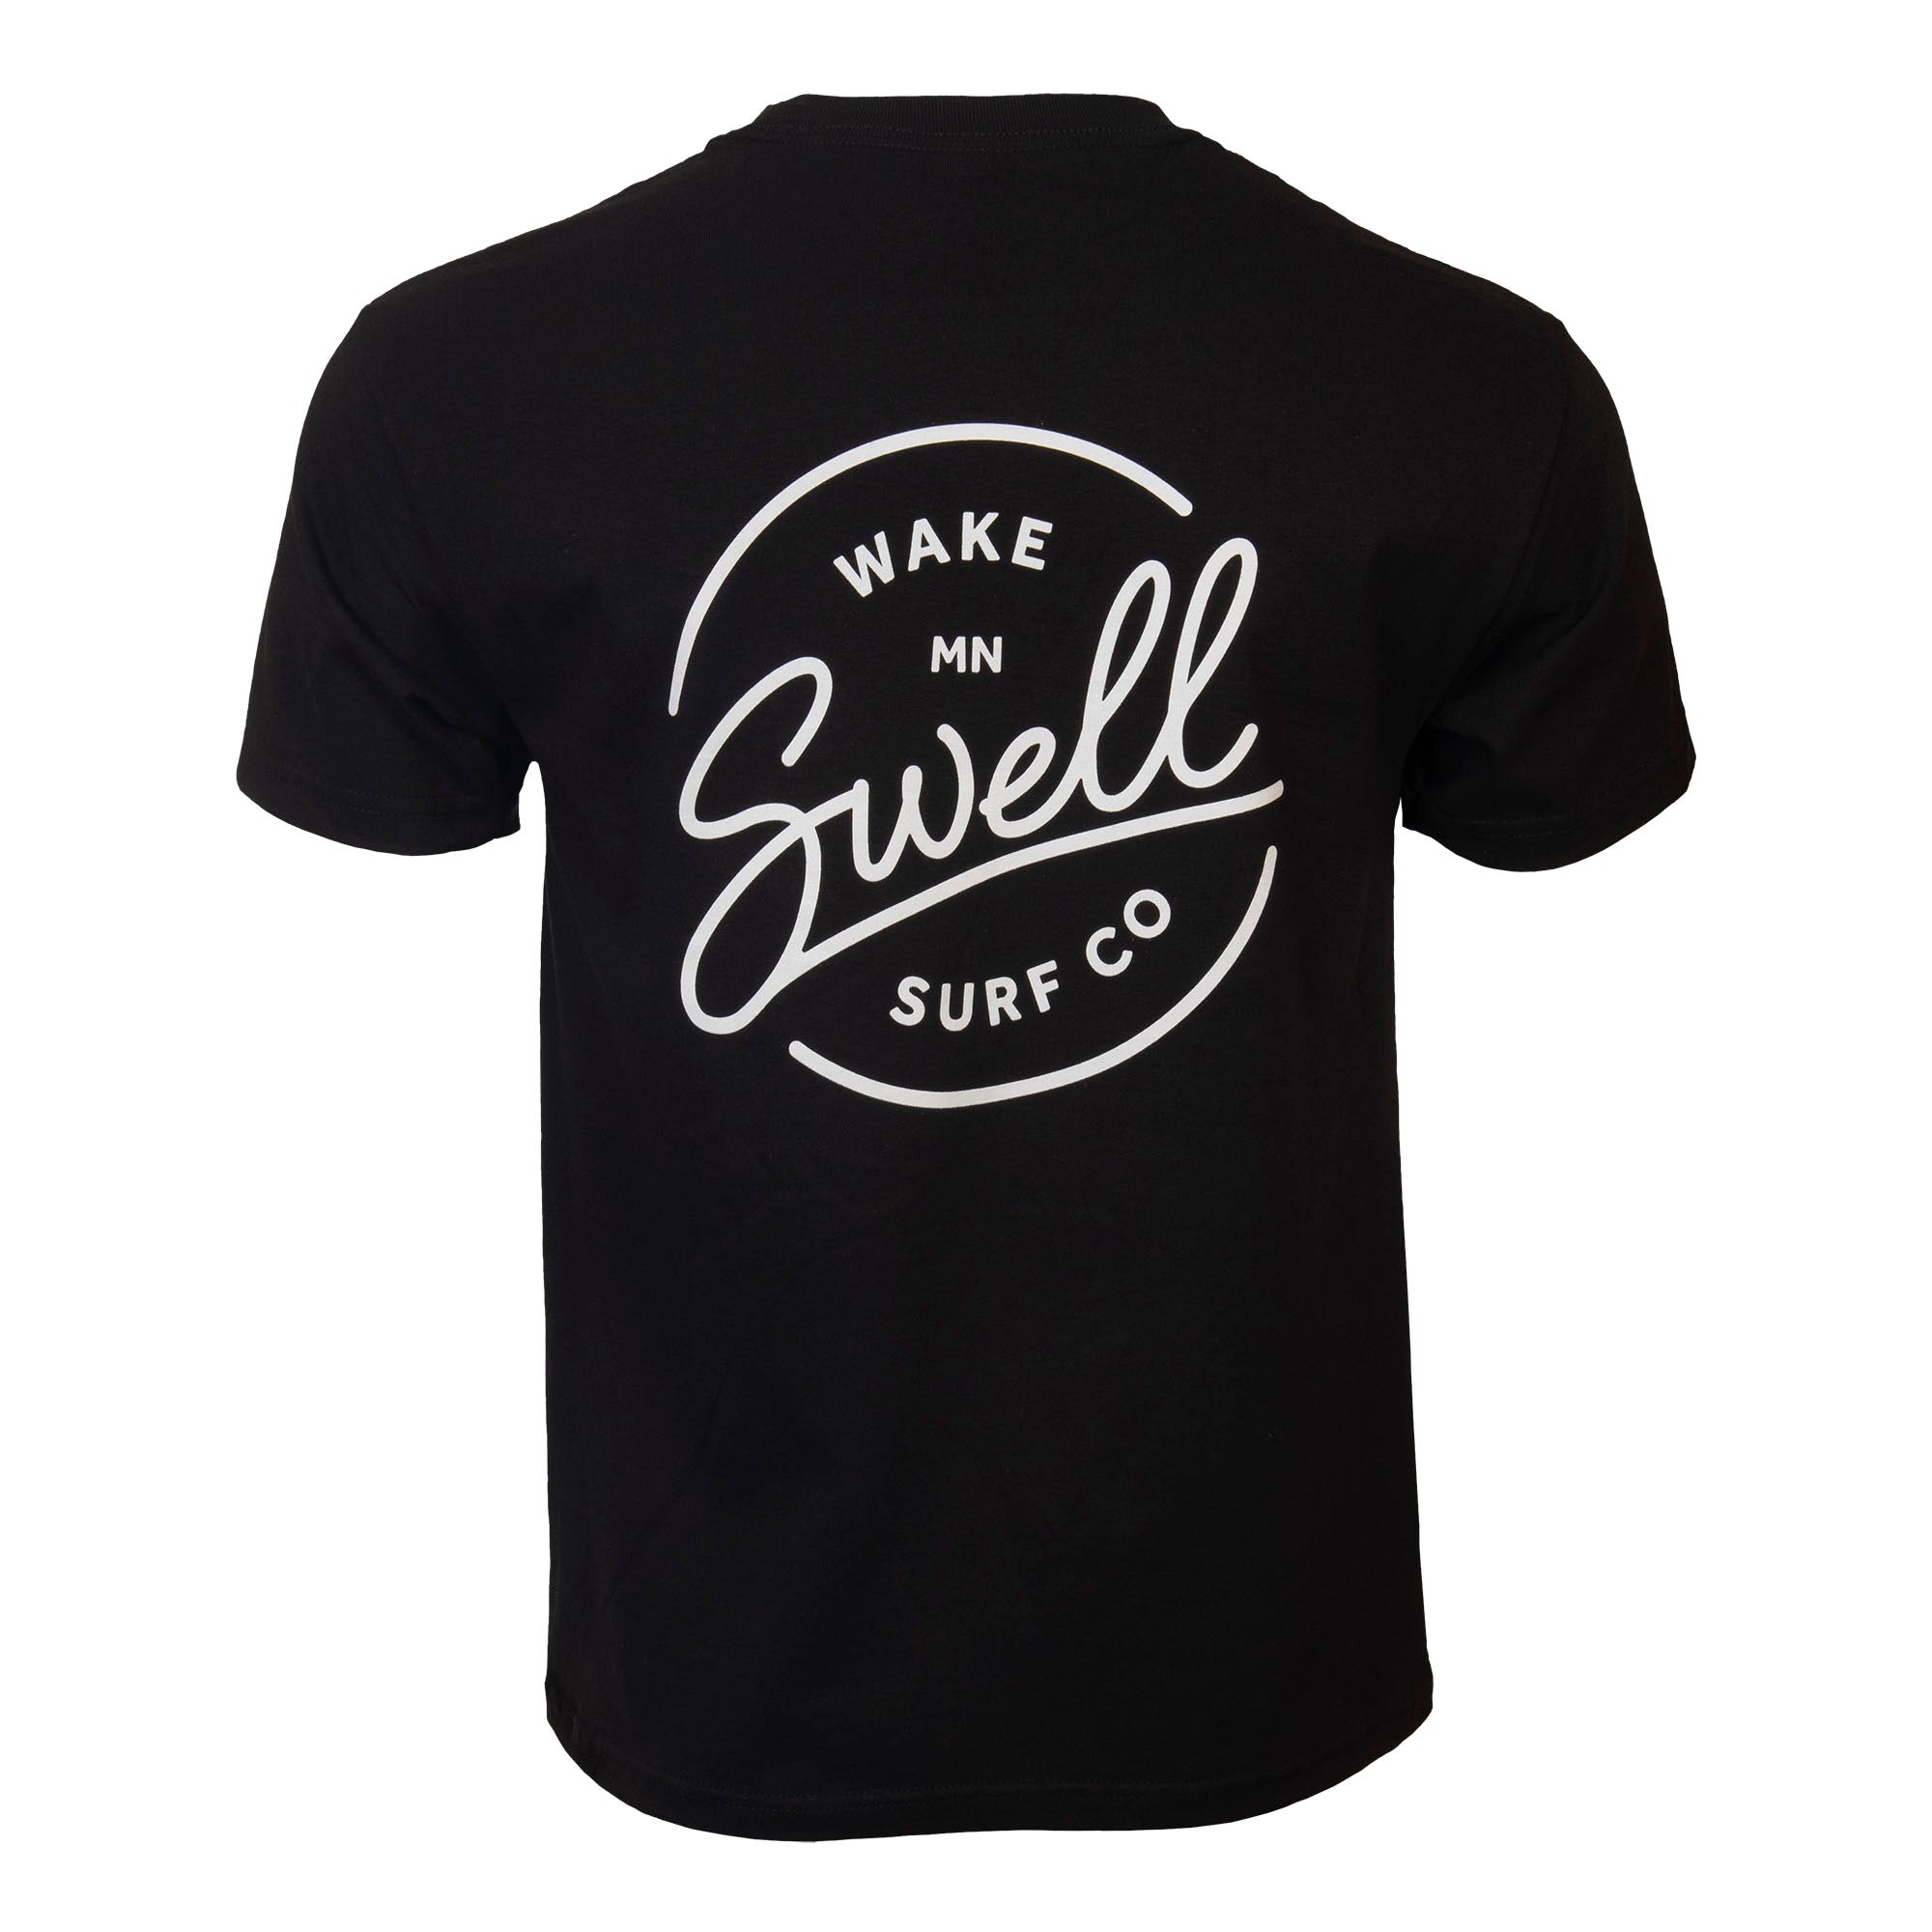 SWELL Wakesurf Co T-Shirt - Classic Fit Cotton Tee